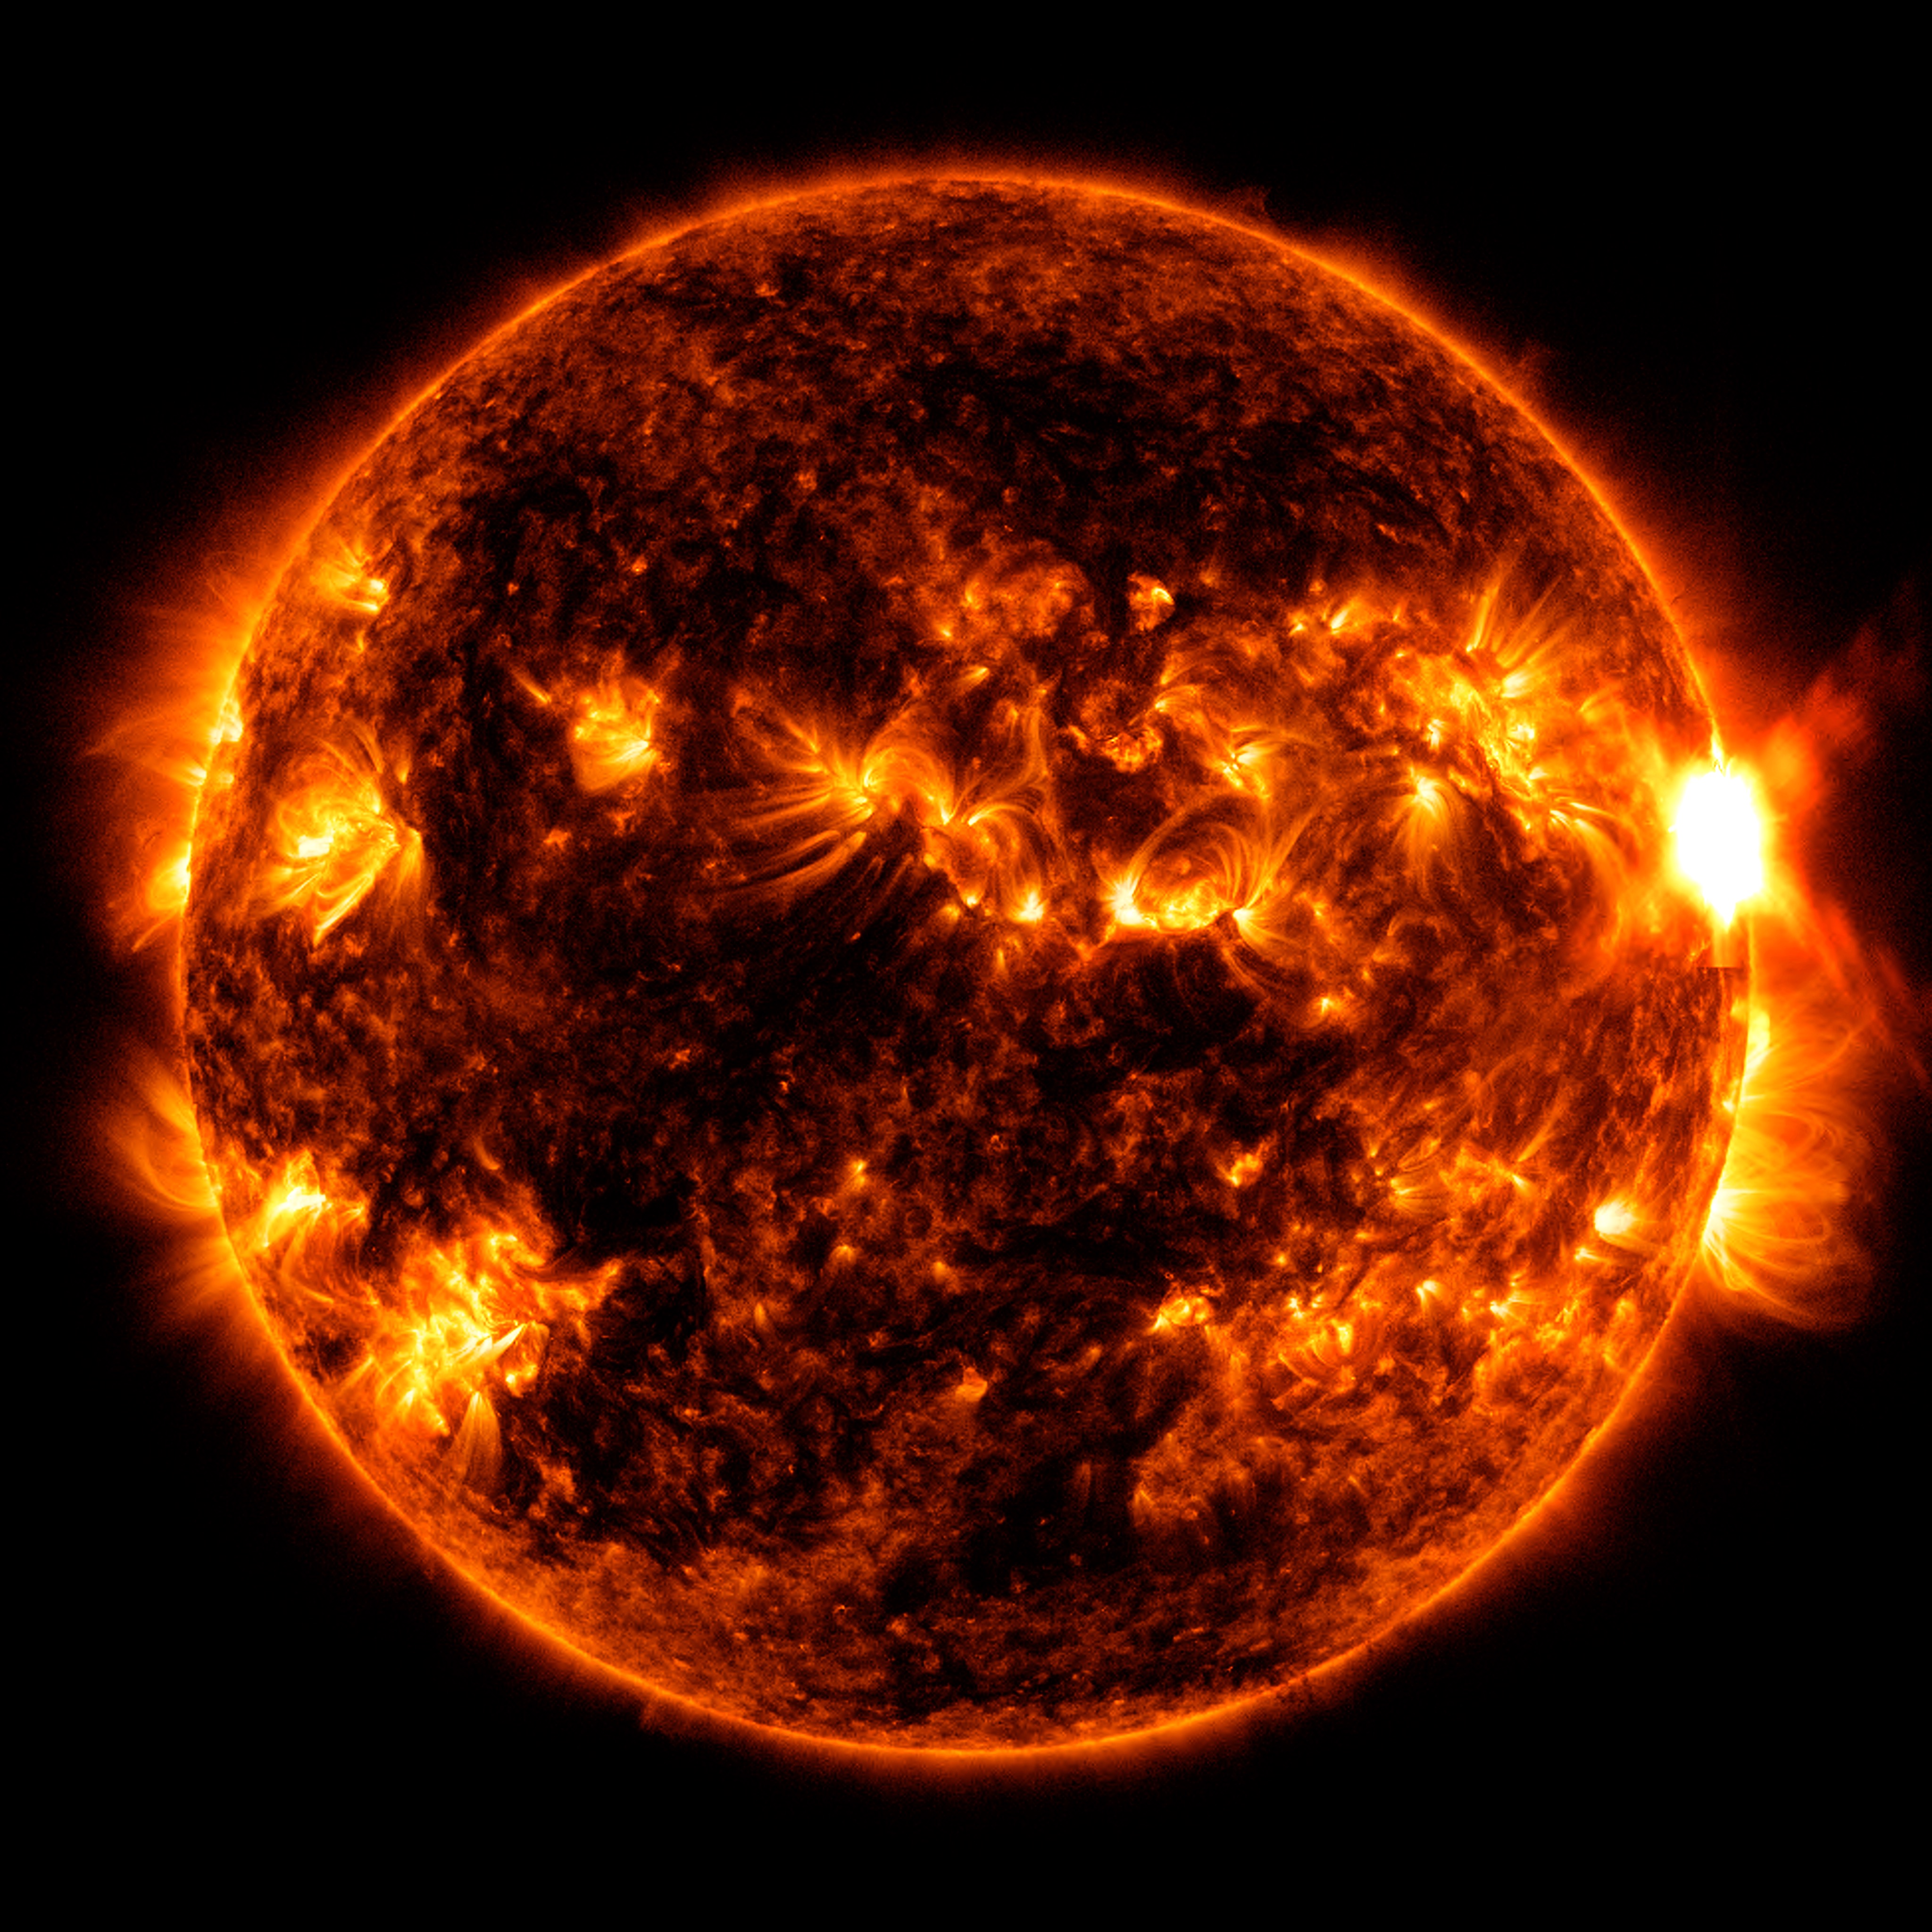 NASA’s Solar Dynamics Observatory captured this image of a solar flare – as seen in the bright flash on the right – on Aug. 5. 2023. The image shows a blend of extreme ultraviolet light that highlights the extremely hot material in flares and which is colorized in red and orange.Credit: NASA/GSFC/SDO